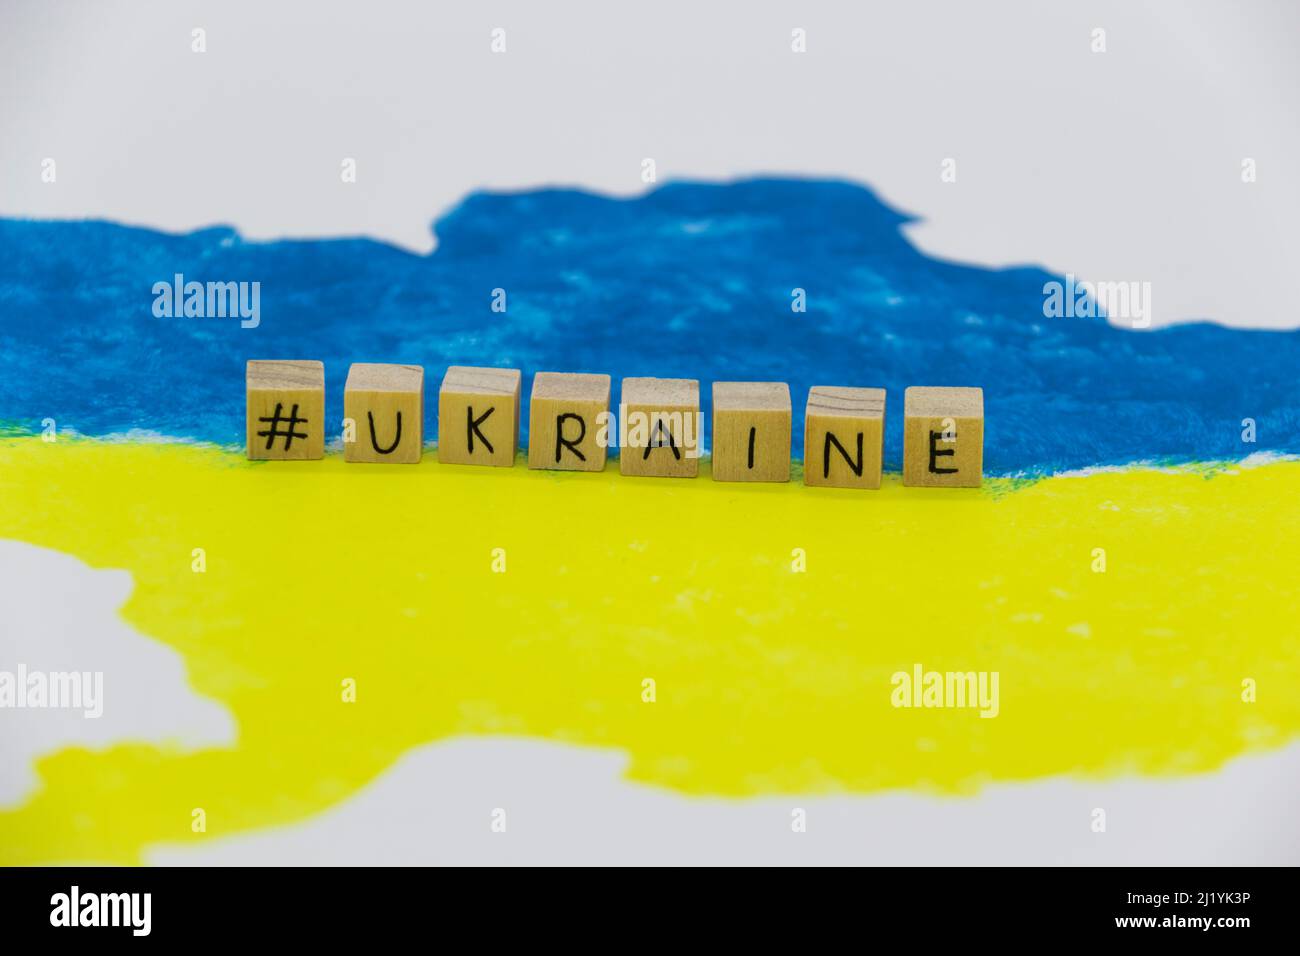 The word Ukraine written on wood cubes on background with Ukrainian map in blue and yellow colors Stock Photo